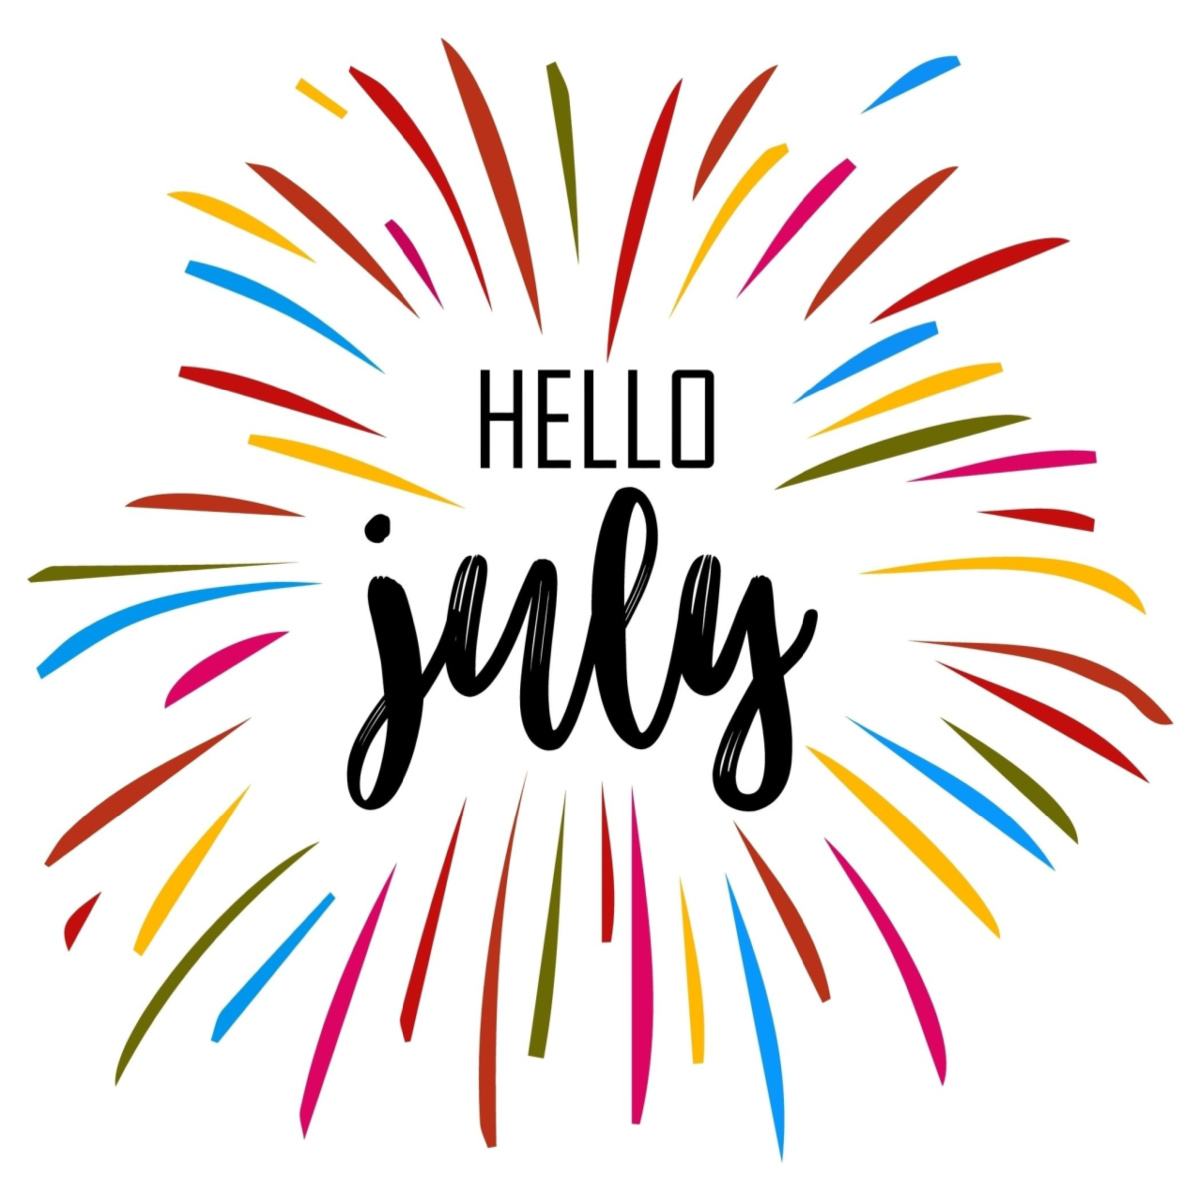 The words "Hello July" inside the center of a firework illustration.